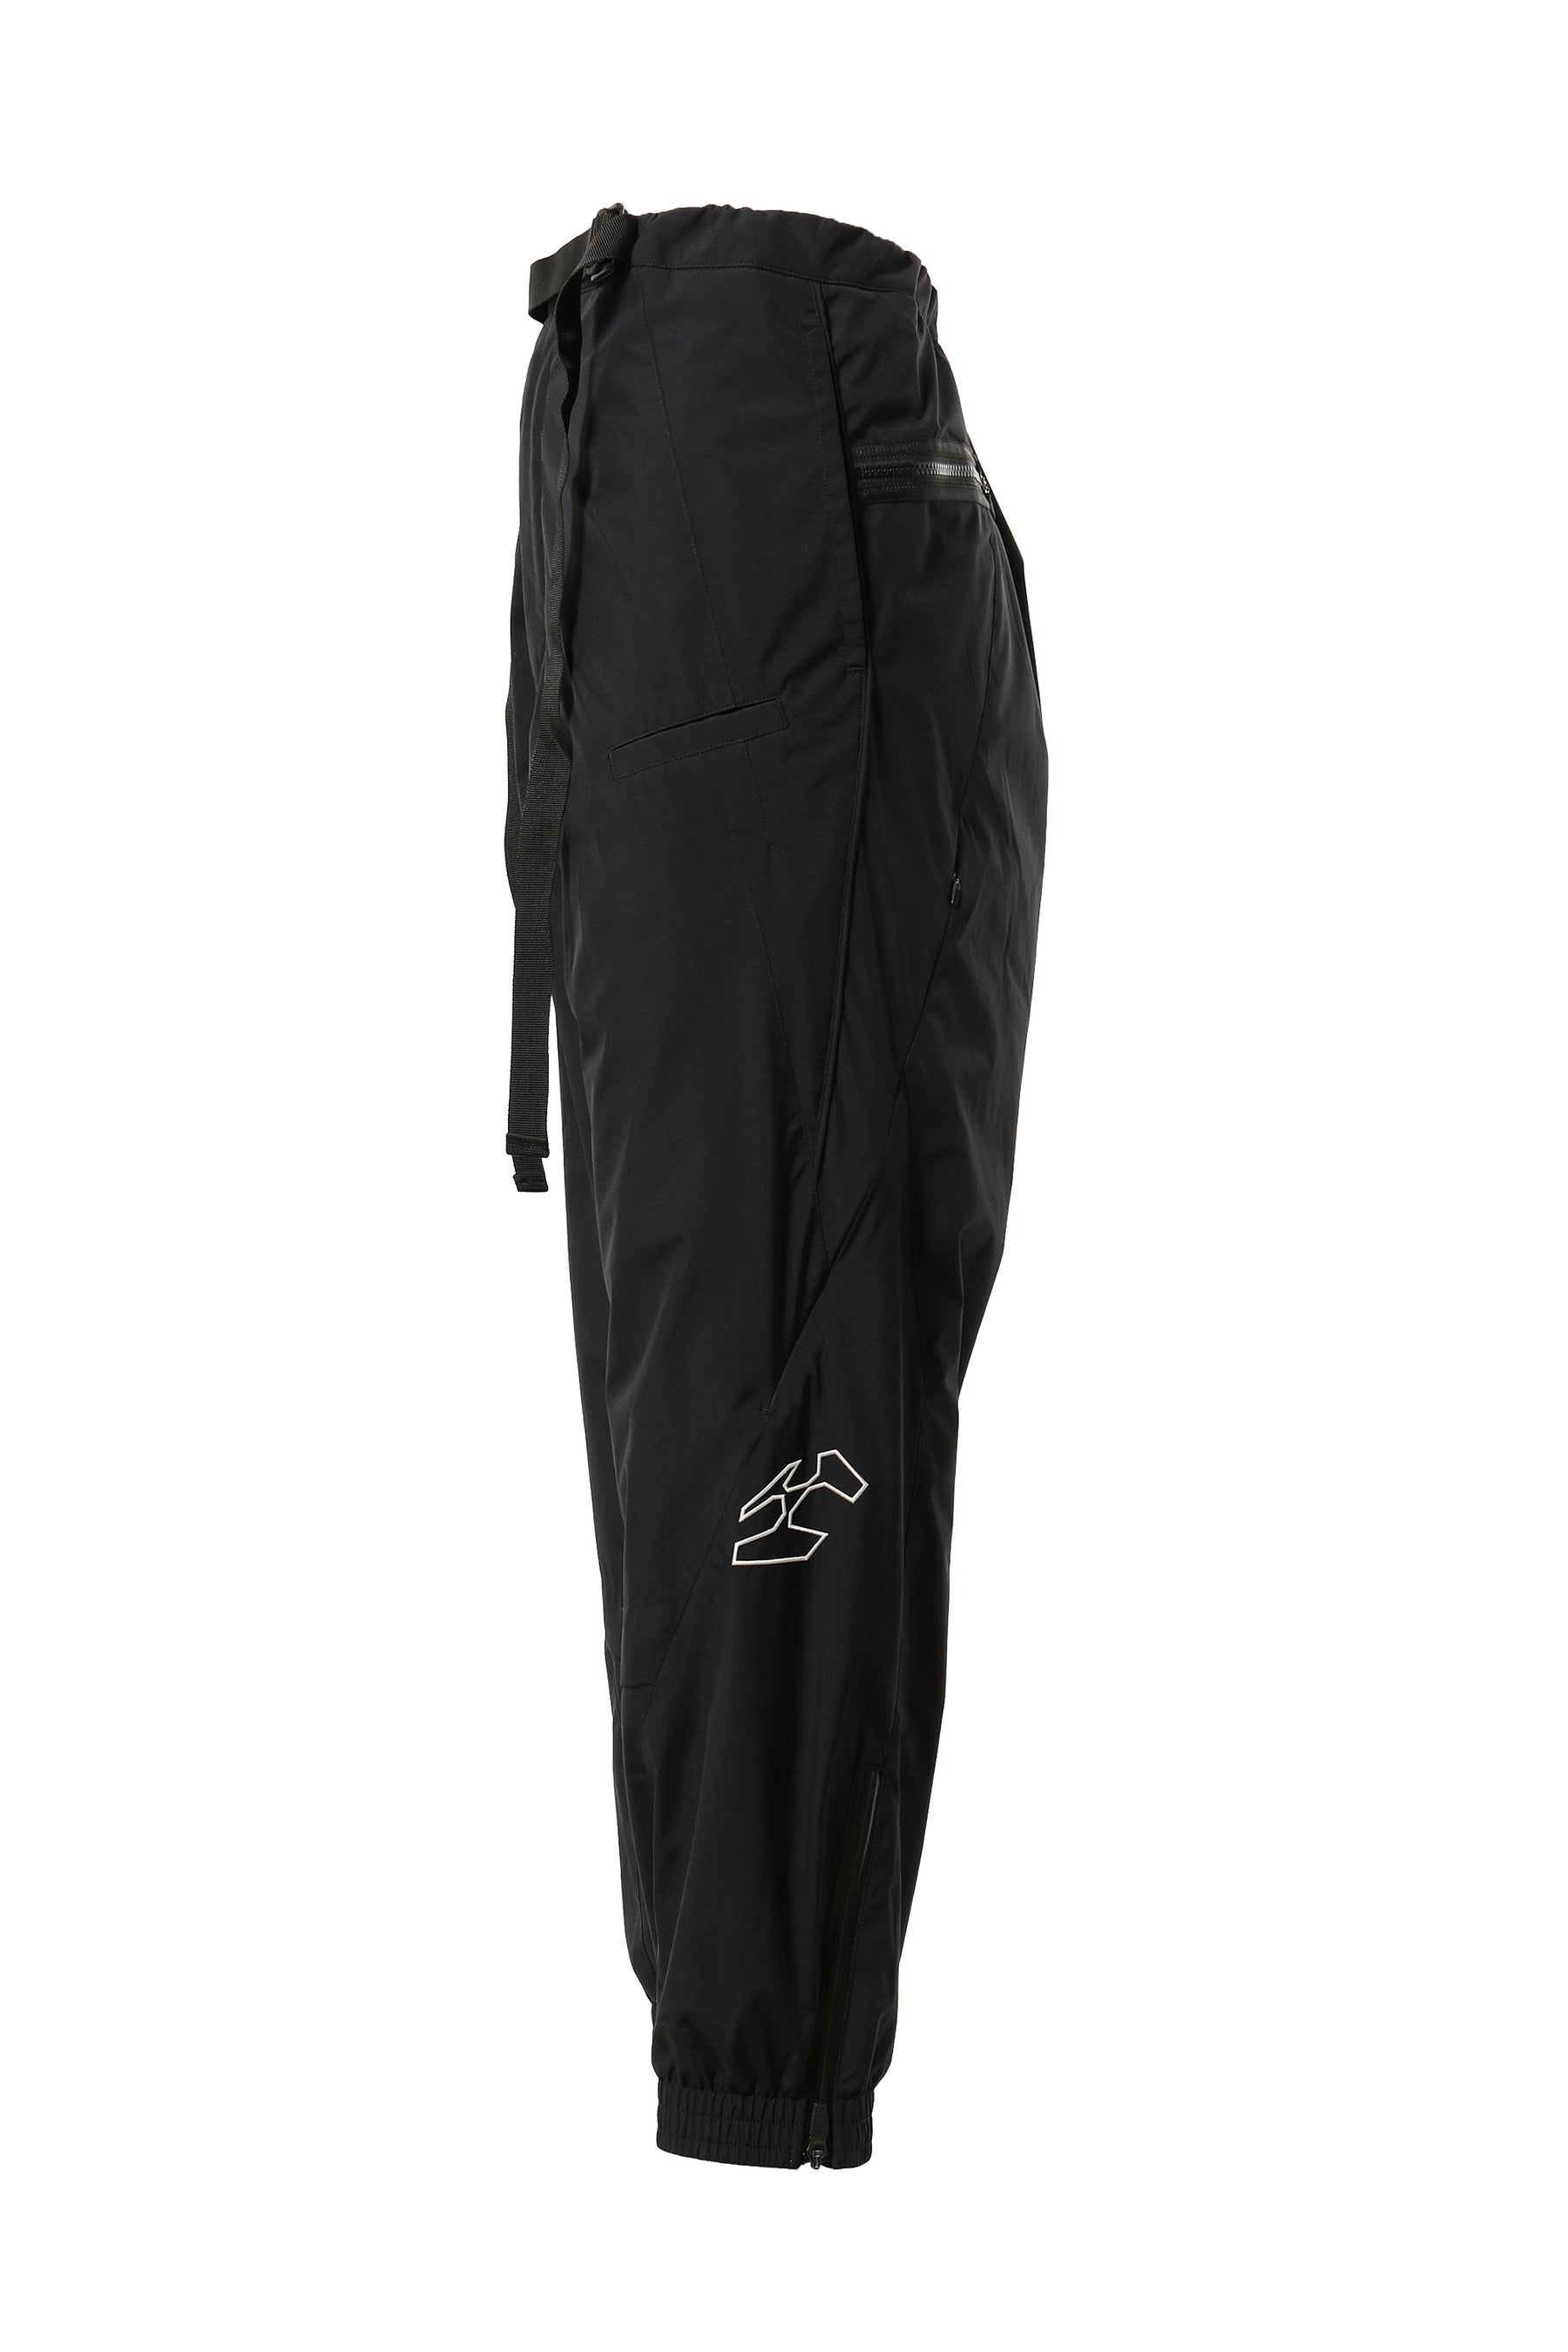 2L GORE-TEX WINDSTOPPER INSULATED VENT PANTS (P53-WS) / BLK